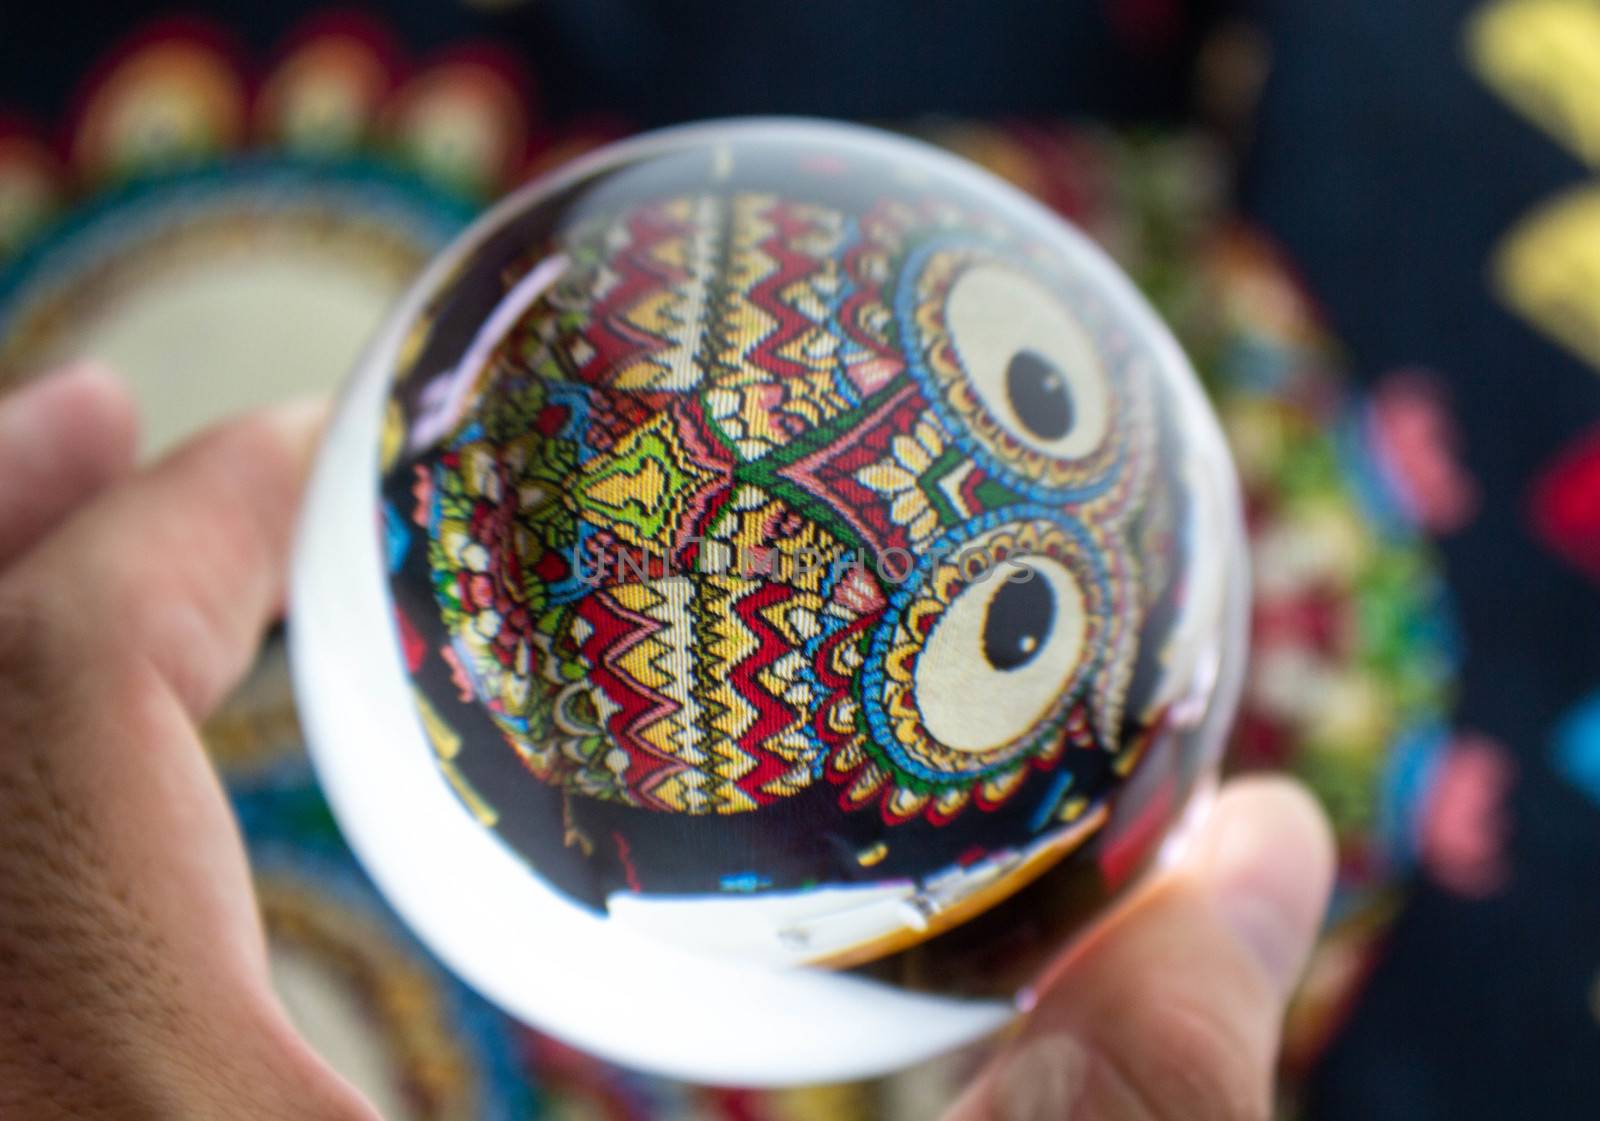 Close-up of Hand holding Crystal glass ball sphere revealing the inner Owl embroidery pattern.